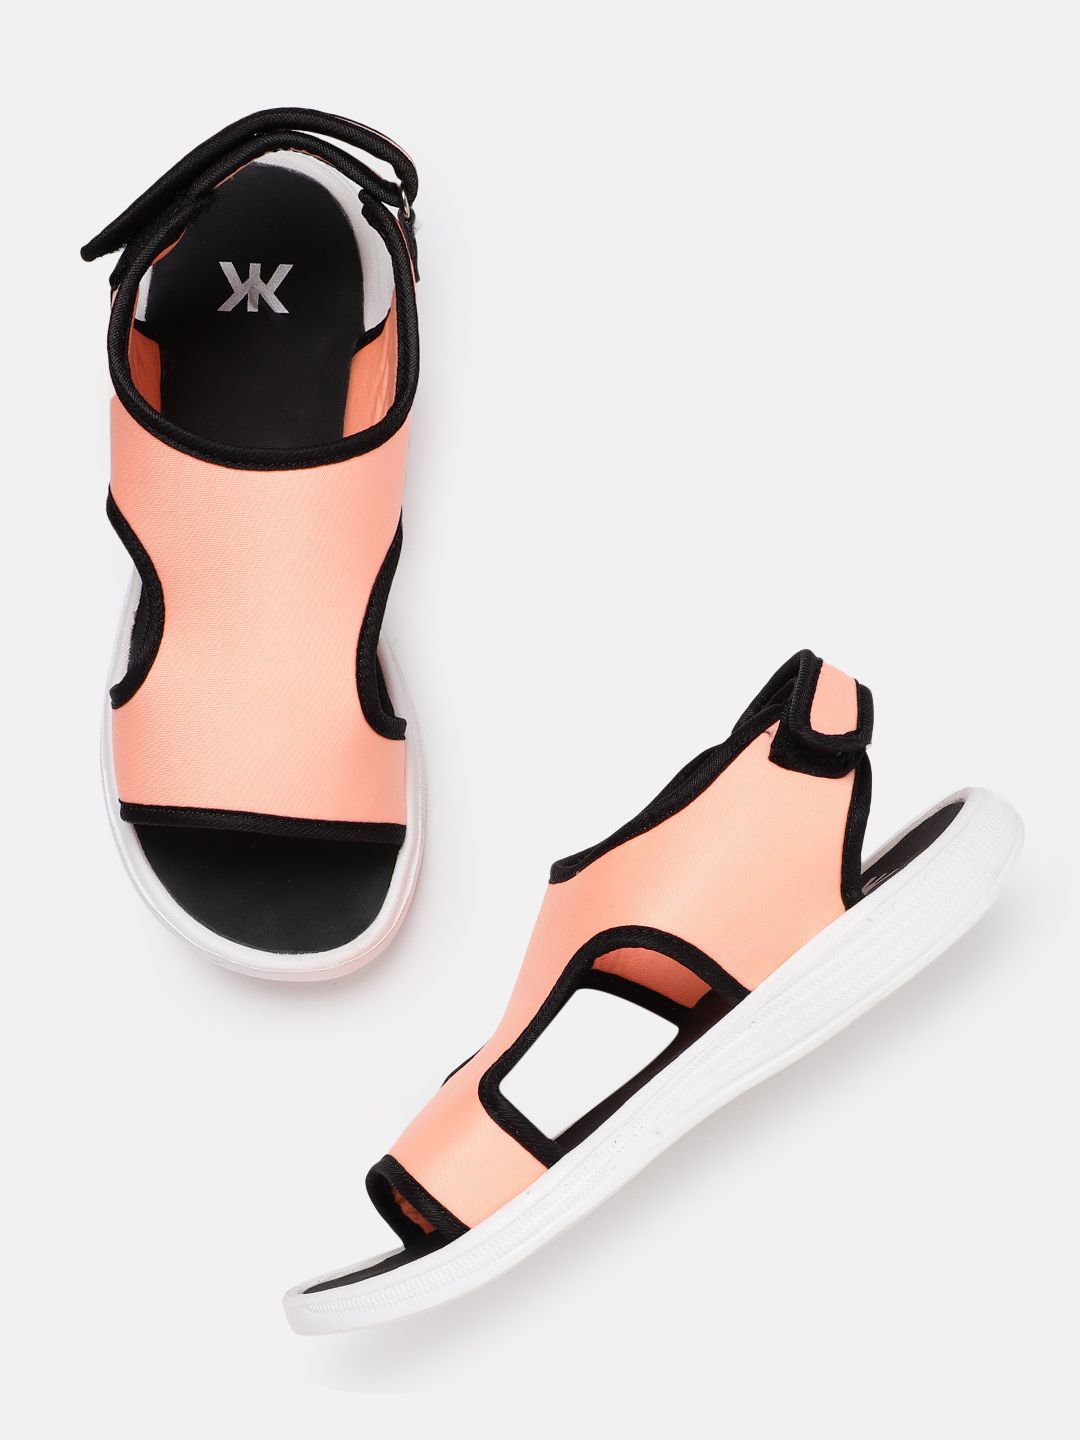 Kook N Keech Women Peach-Coloured Solid Sports Sandals Price in India